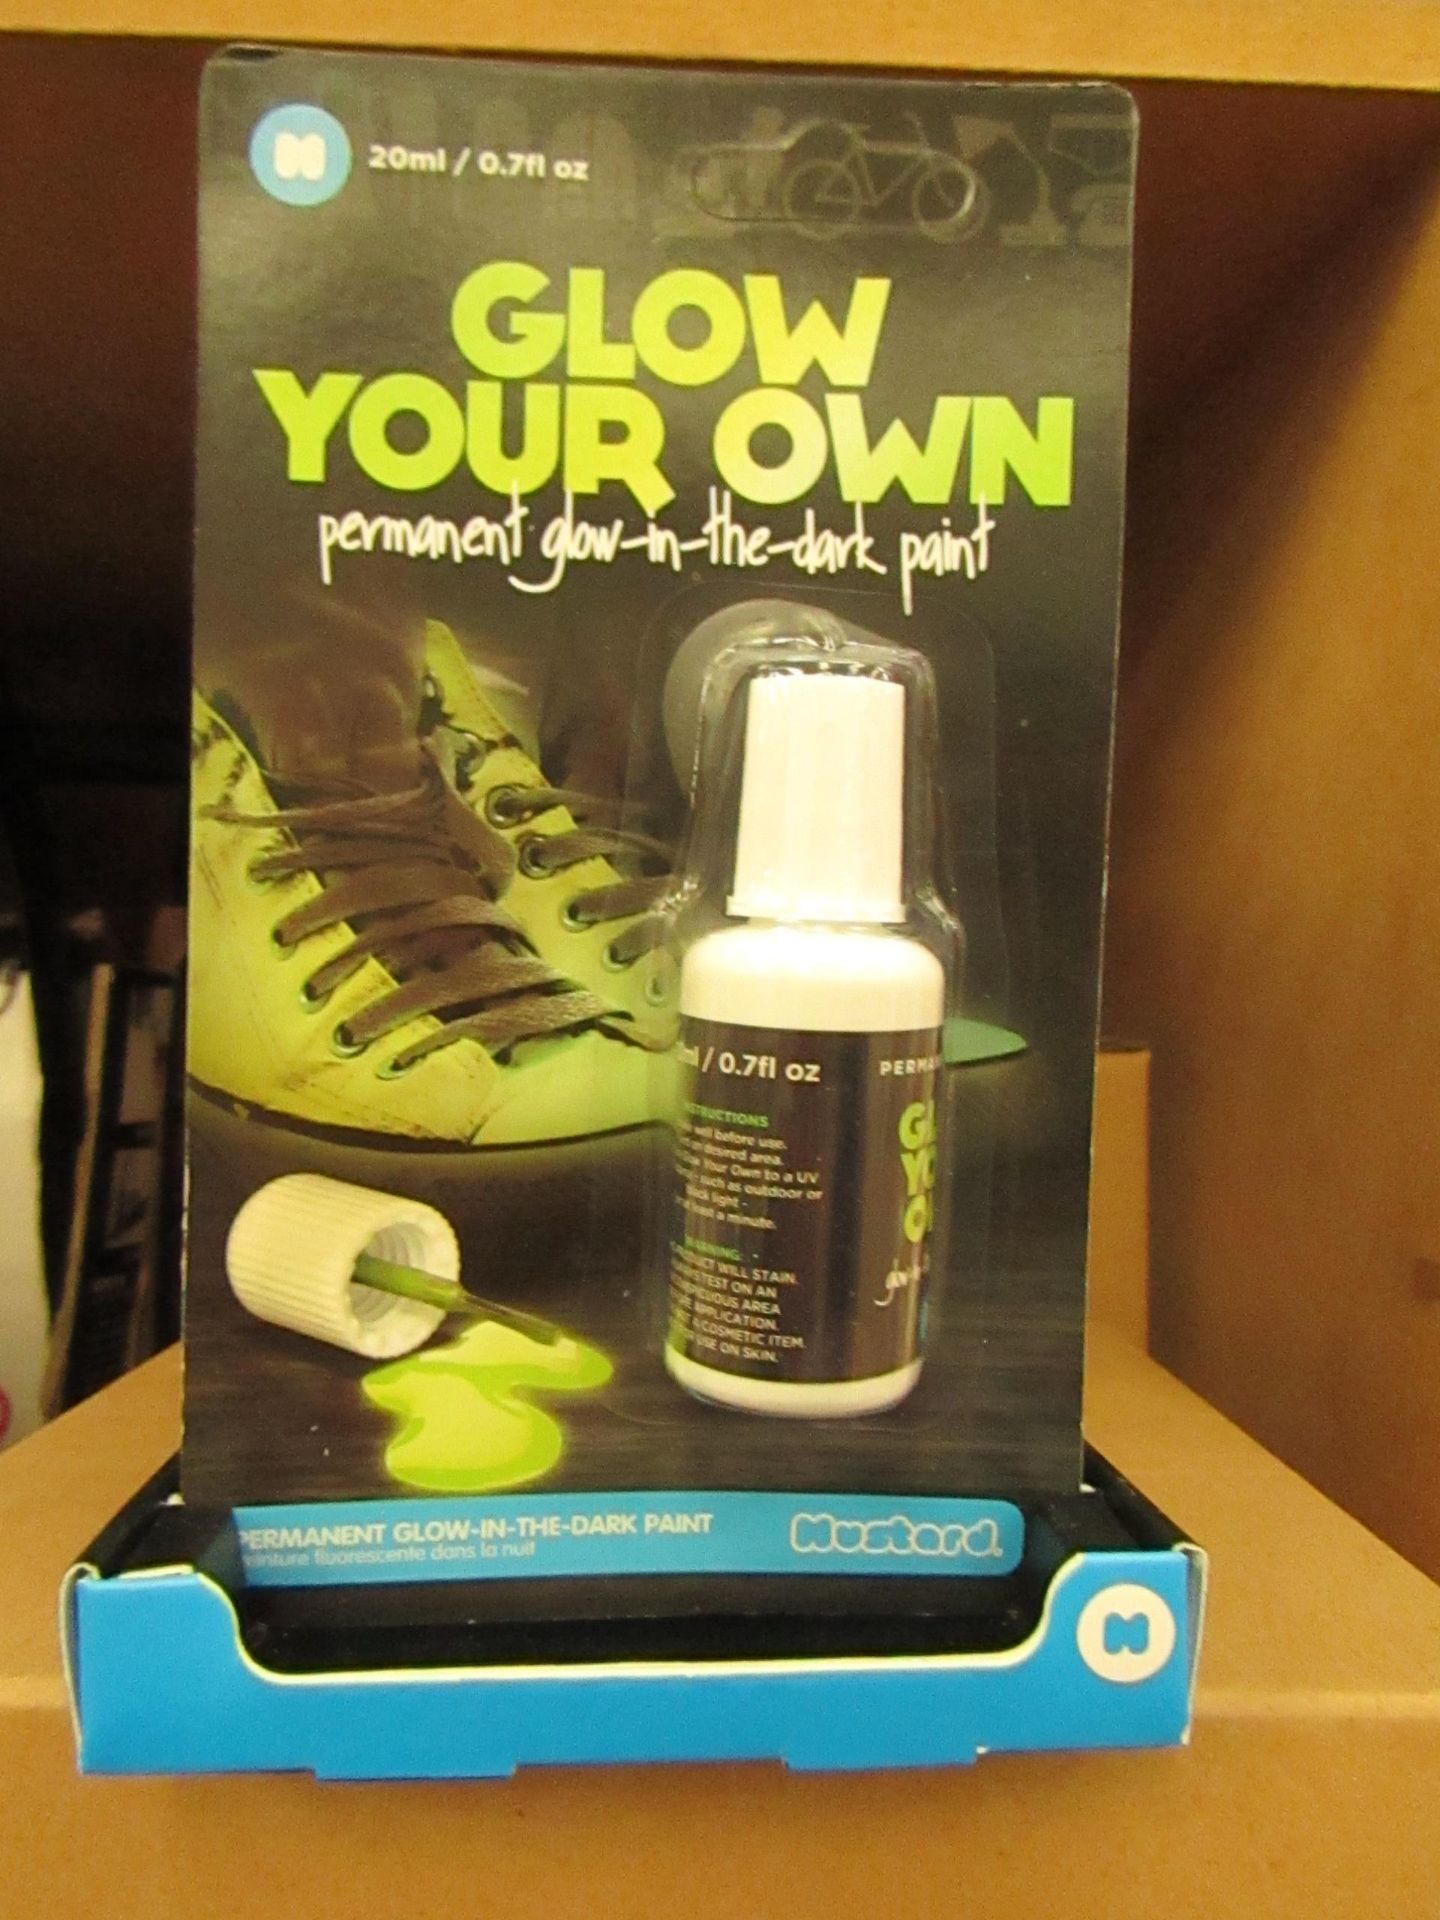 Box of 6 Mustard - Glow Your Own (Permanent Glow-in-the Dark Paint - New & Boxed.